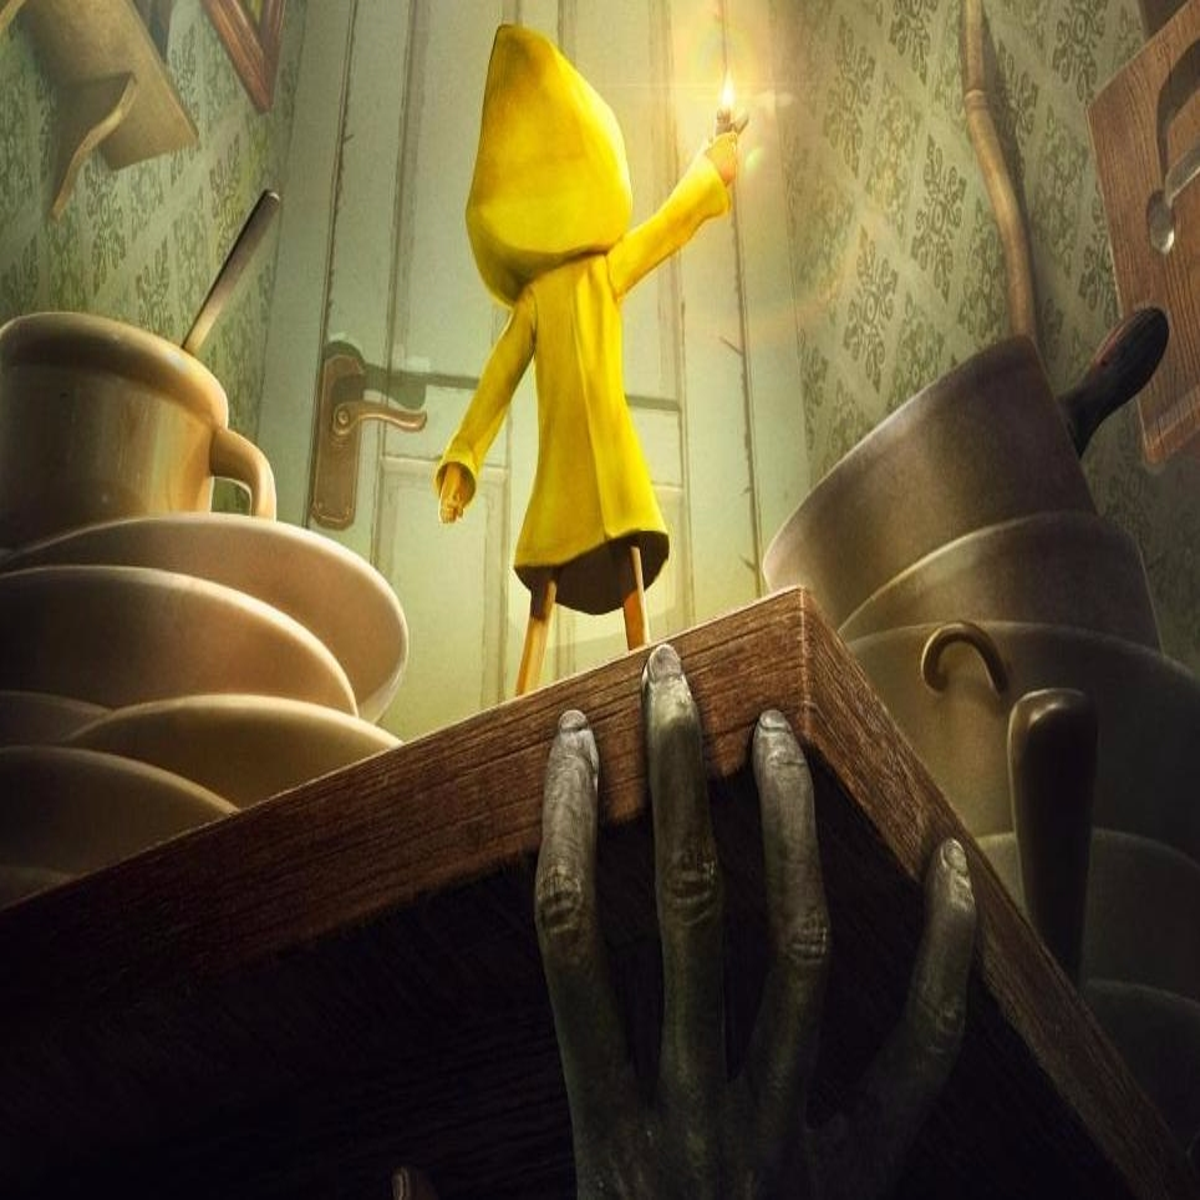 Review: LITTLE NIGHTMARES 2 Is Simply Dreadful and Dreamy — GeekTyrant